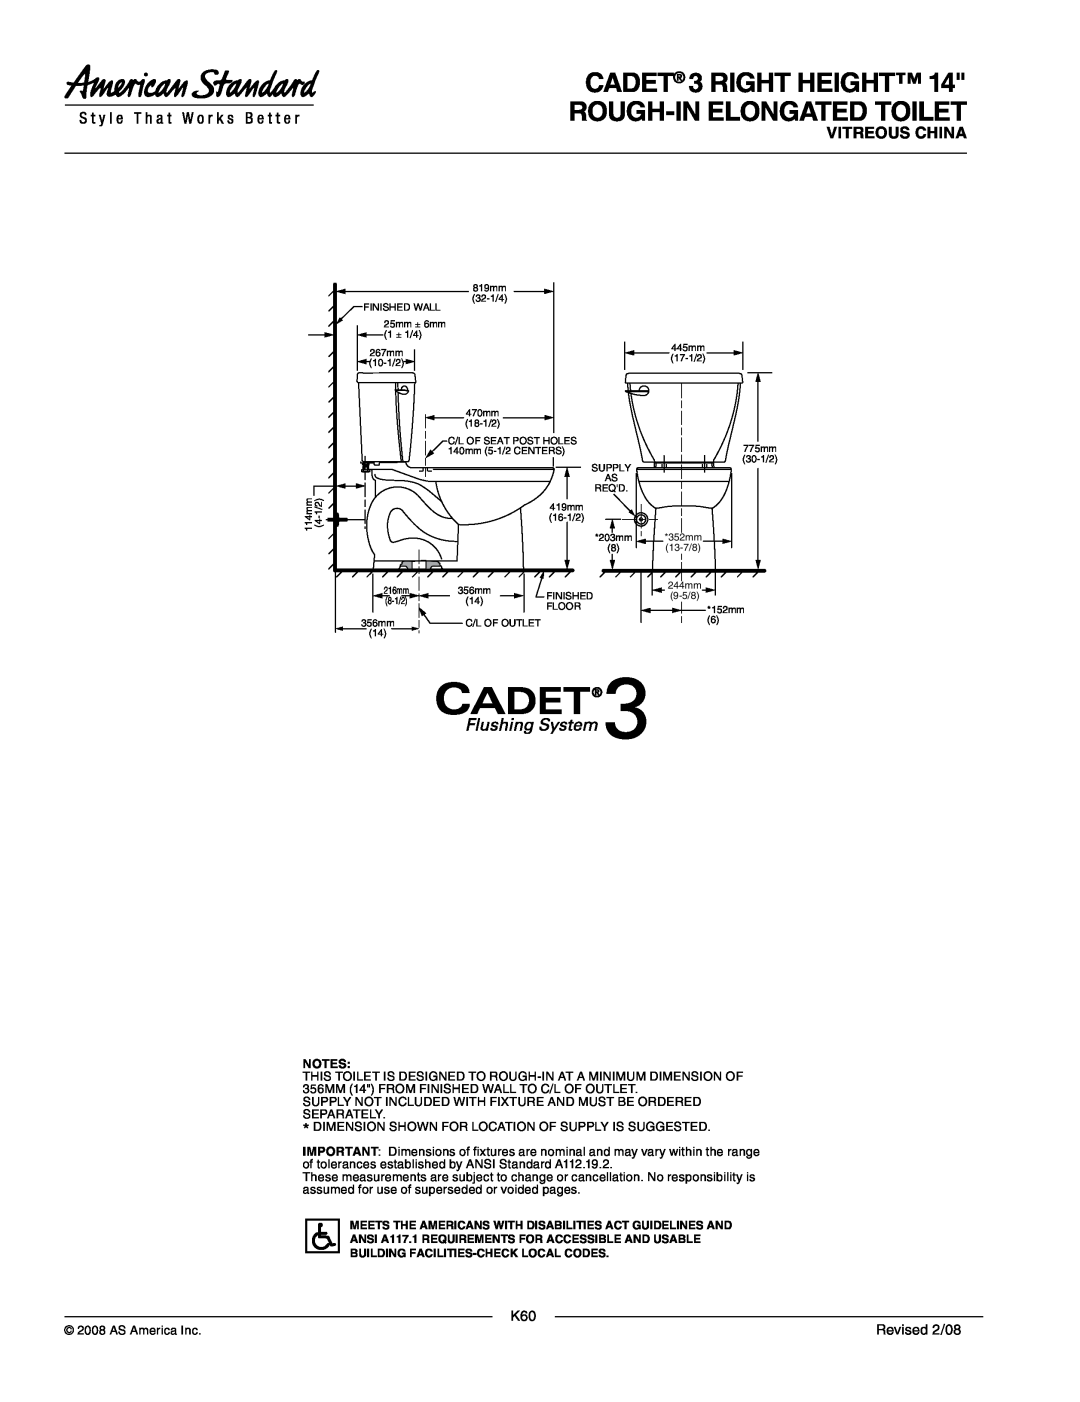 American Standard 2386.014 dimensions CADET 3 RIGHT HEIGHT 14 Rough-inELONGATED TOILET, Vitreous China, Revised 2/08 